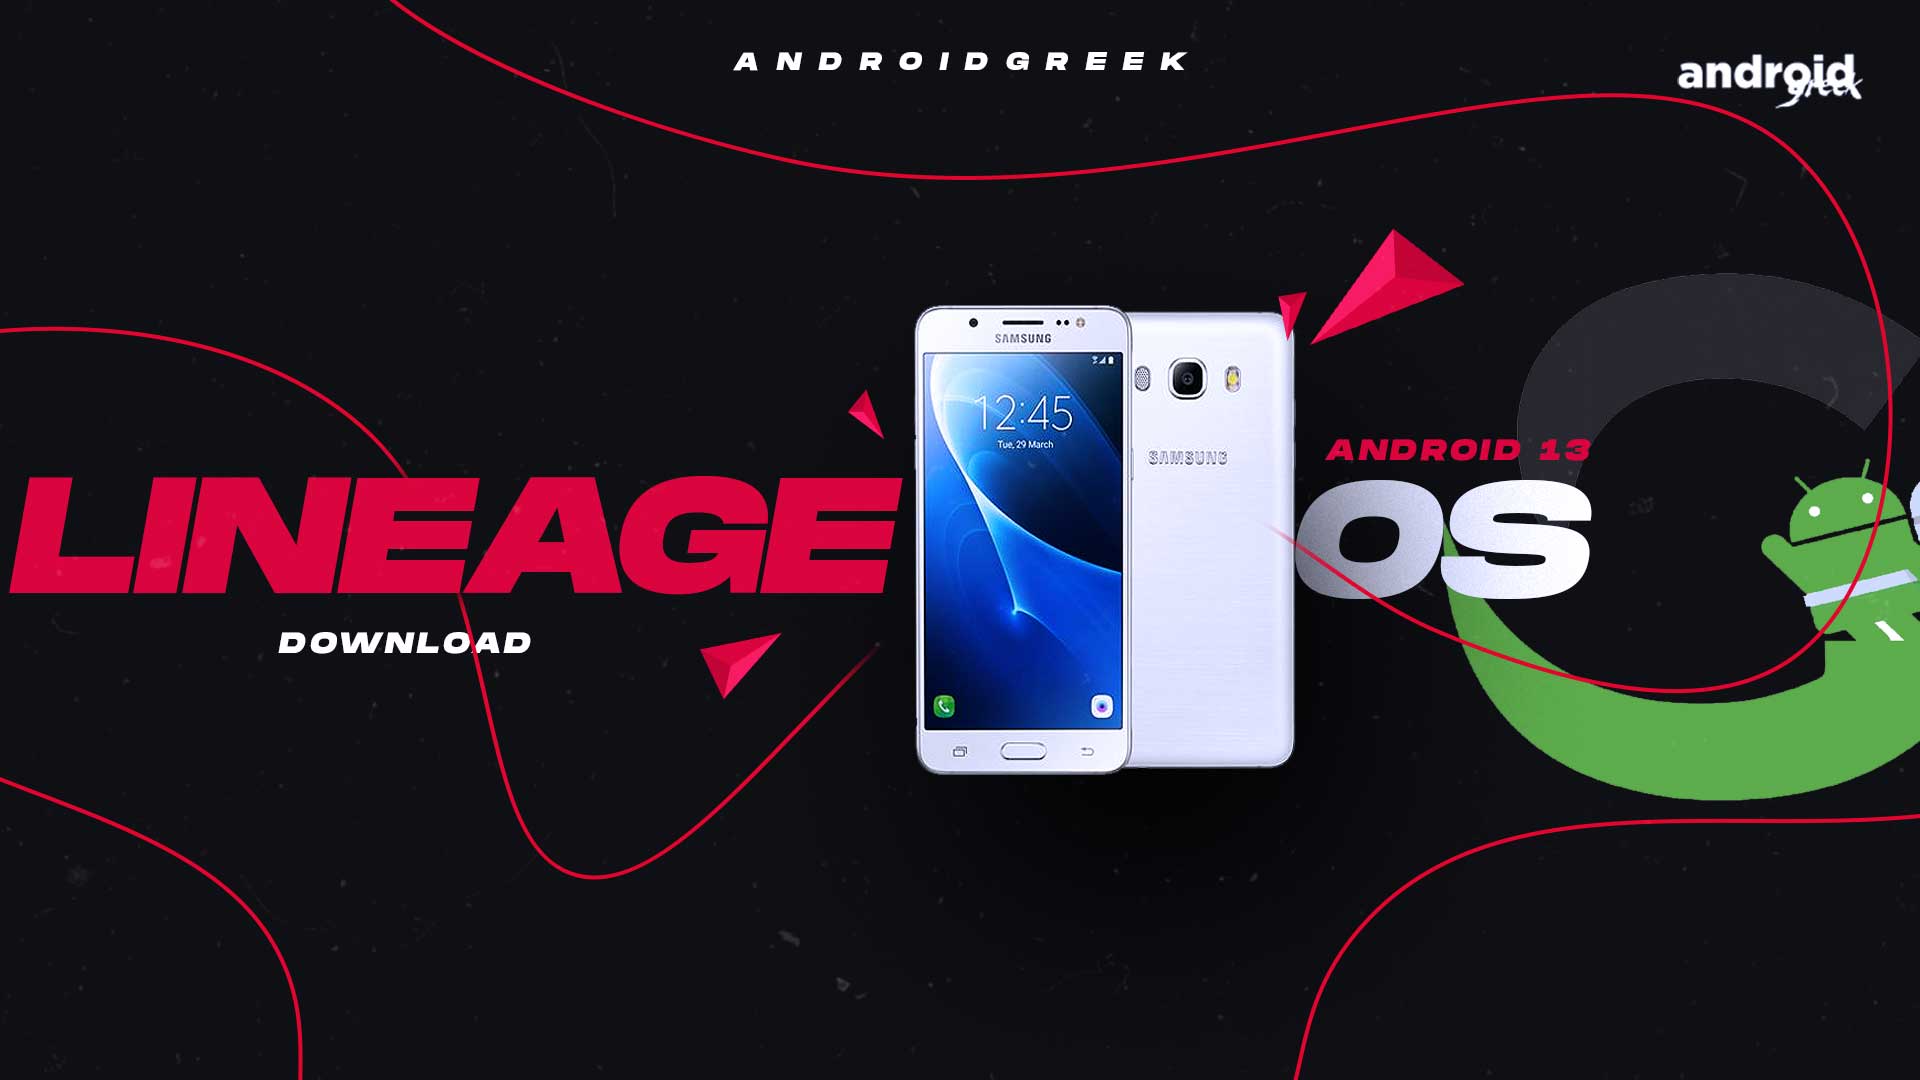 Download Android 13 Lineageos 20 For Samsung Galaxy J5 2015 And Galaxy J5  2016 (J5X)